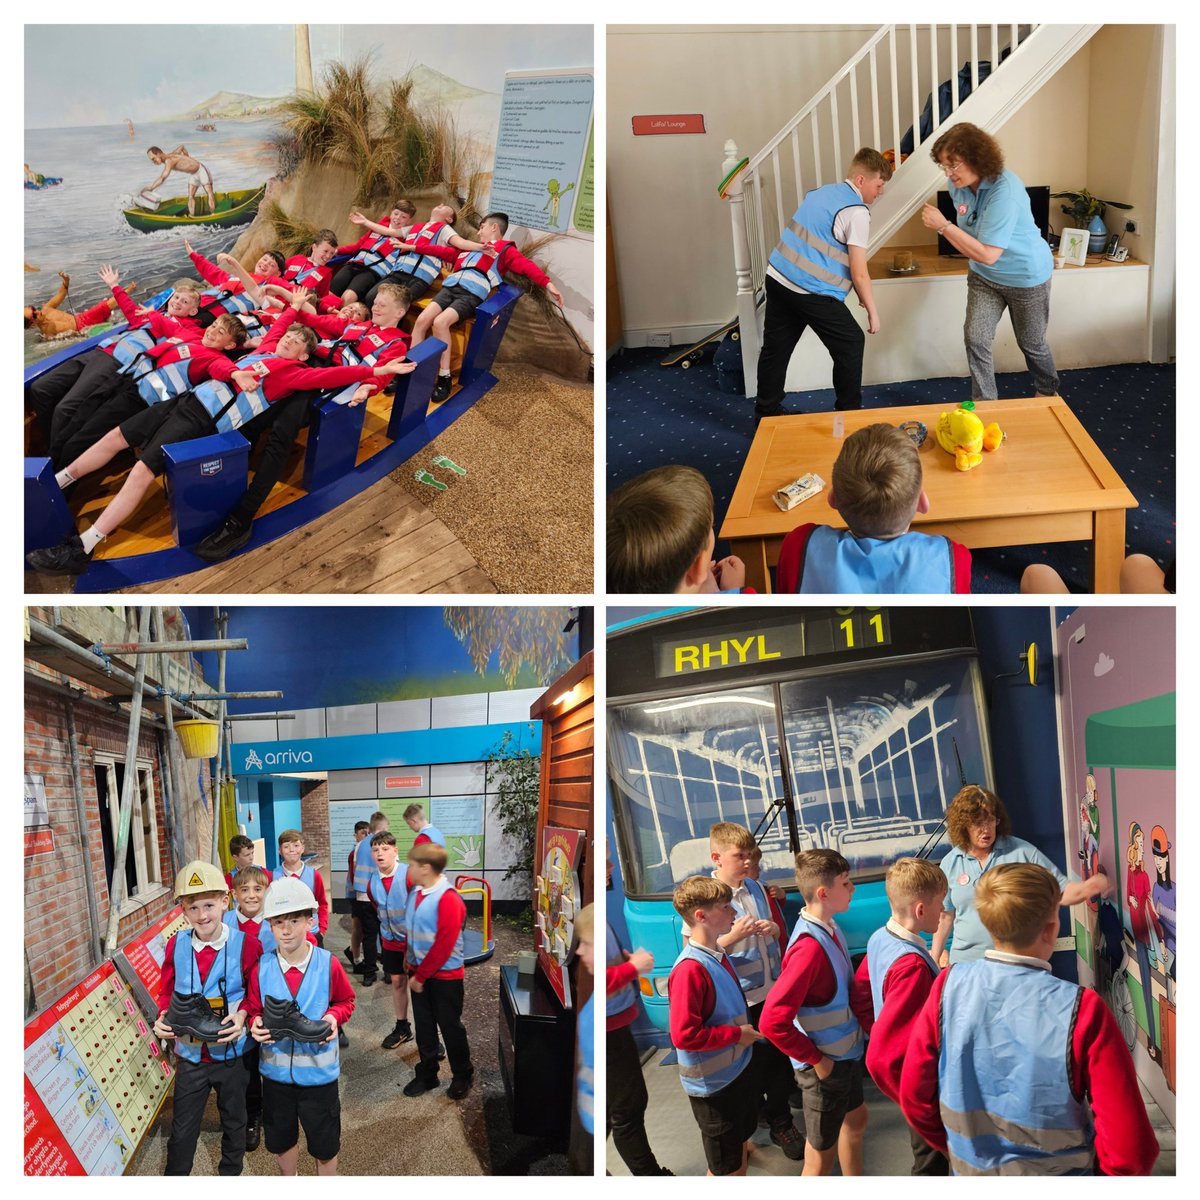 Blwyddyn 6 had a fabulous day @DangerPointLtd,  learning about safety in and around the home; and out and about in the outside environment. 
#roadsafety
#safetyinthehome 
#healthandwellbeing